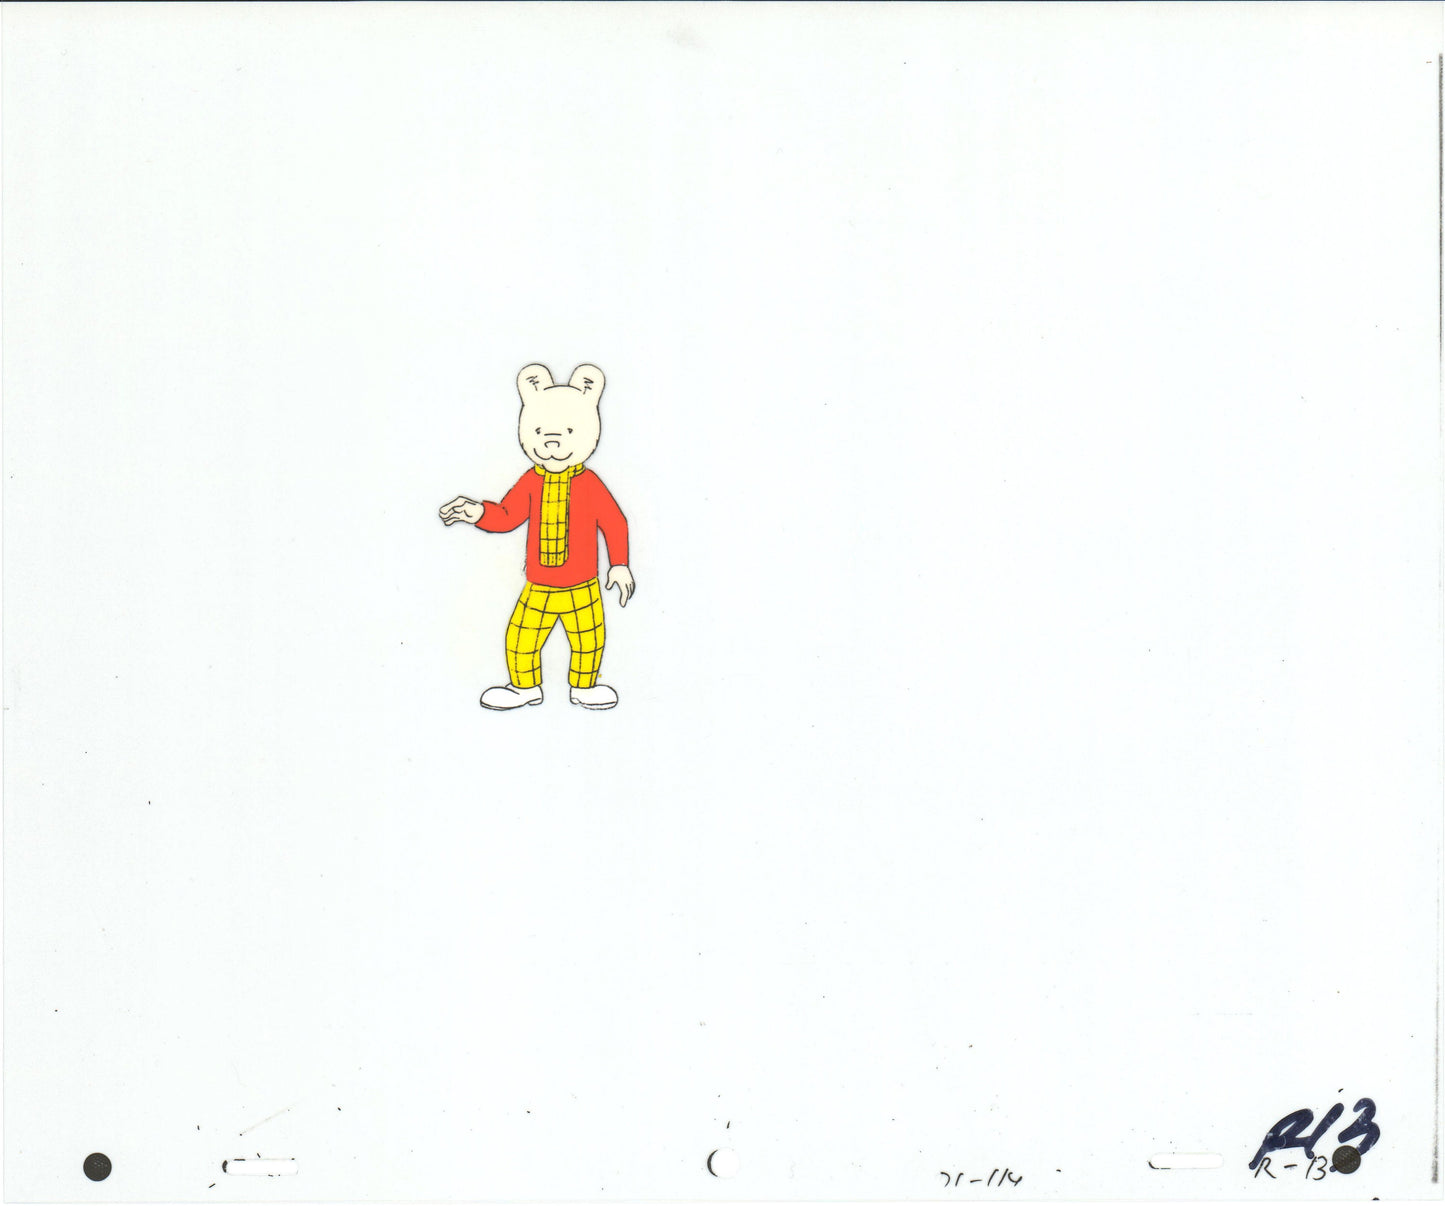 RUPERT Bear Original Production Animation Cel and Drawing from the Cartoon by Nelvana Tourtel Animation 1990s B70288